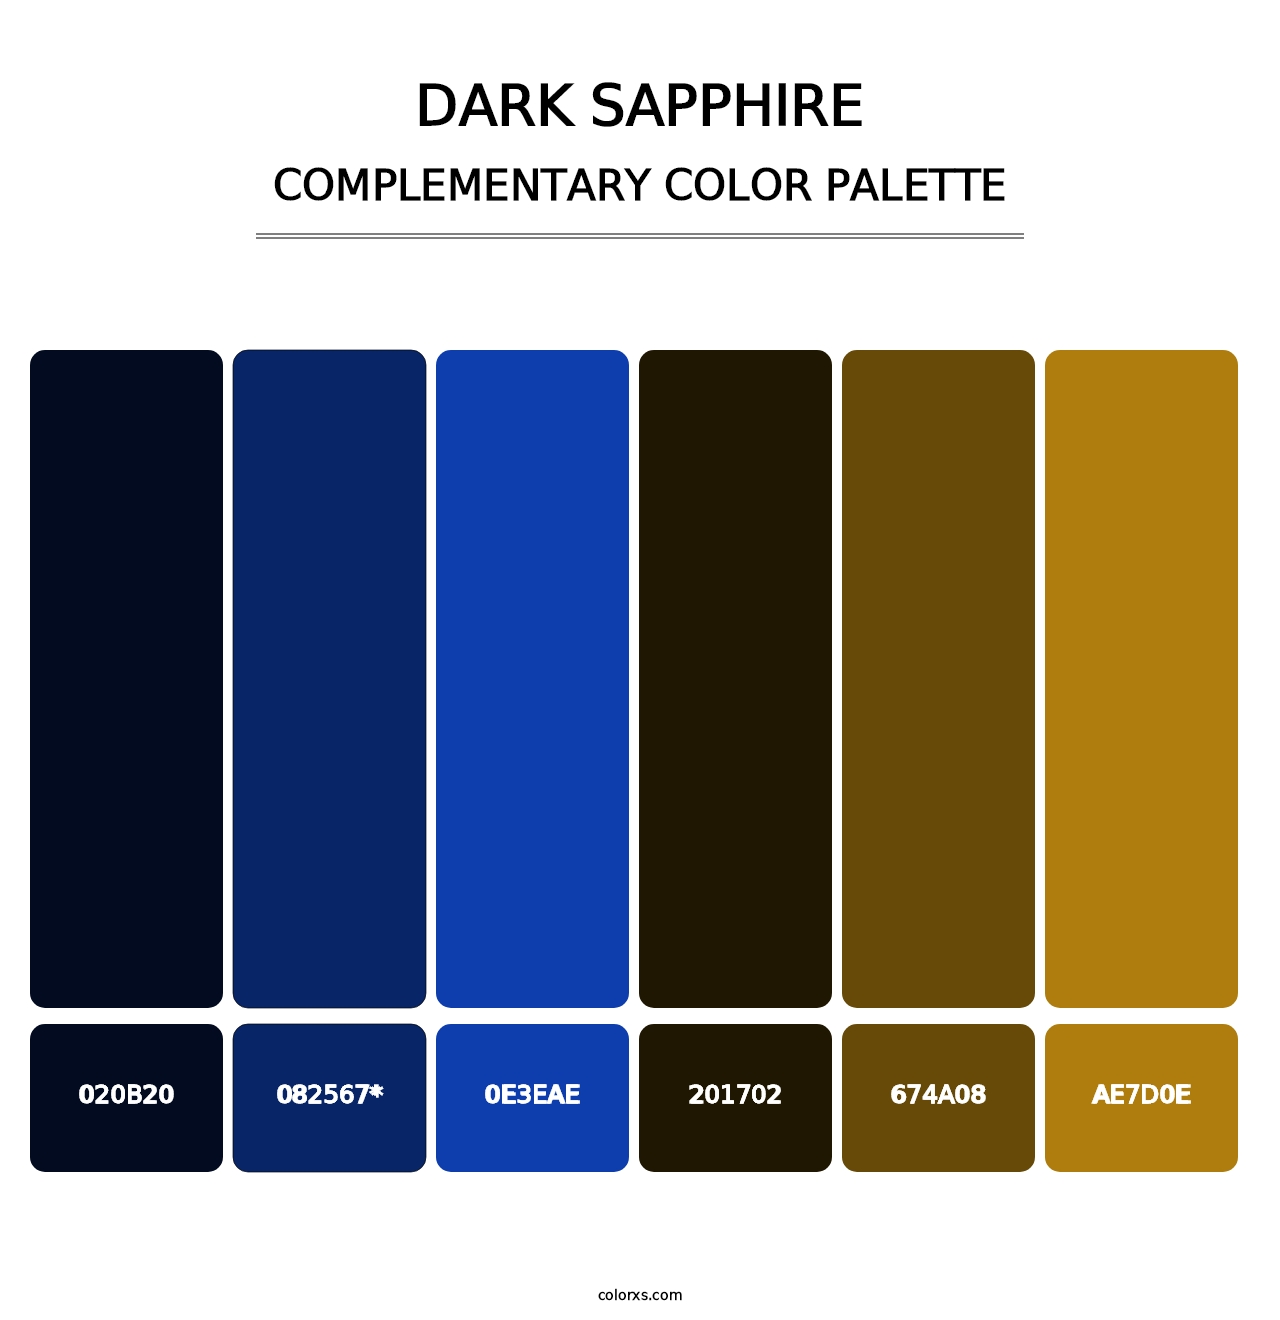 Dark Sapphire - Complementary Color Palette